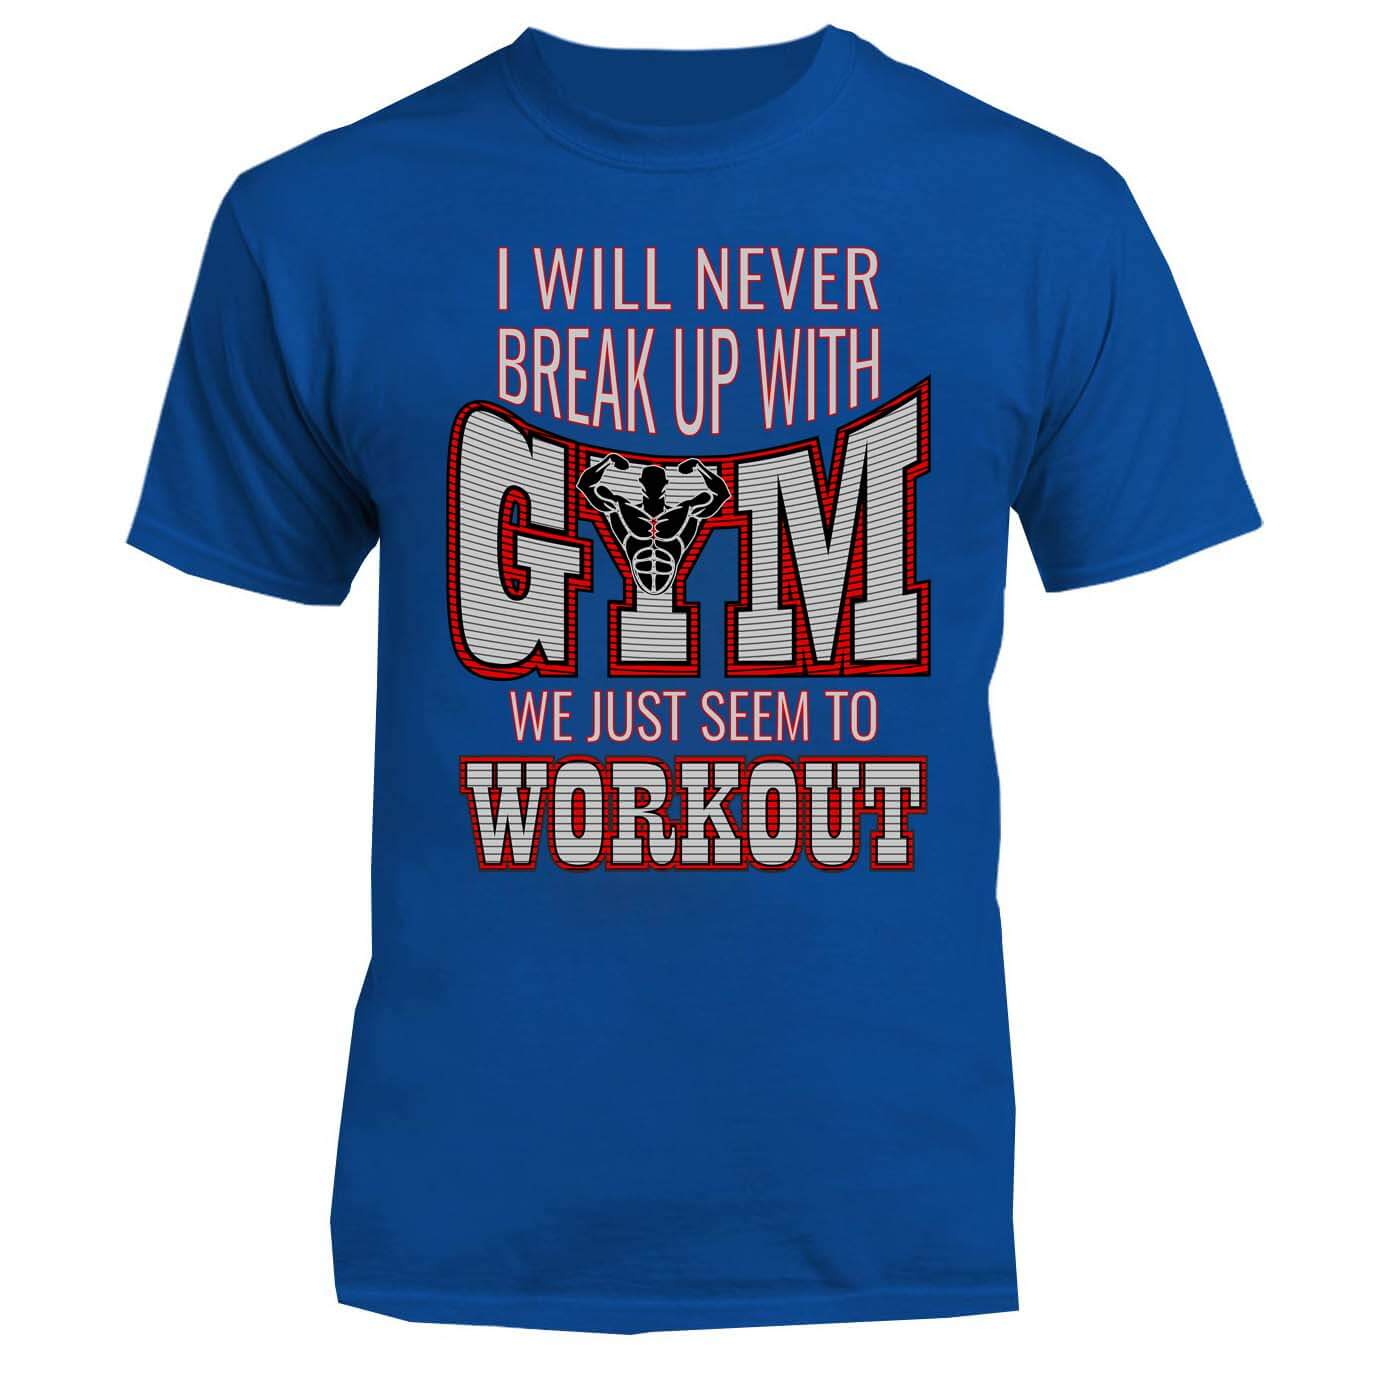 I Will Never Breakup With Gym - Exclusive Design